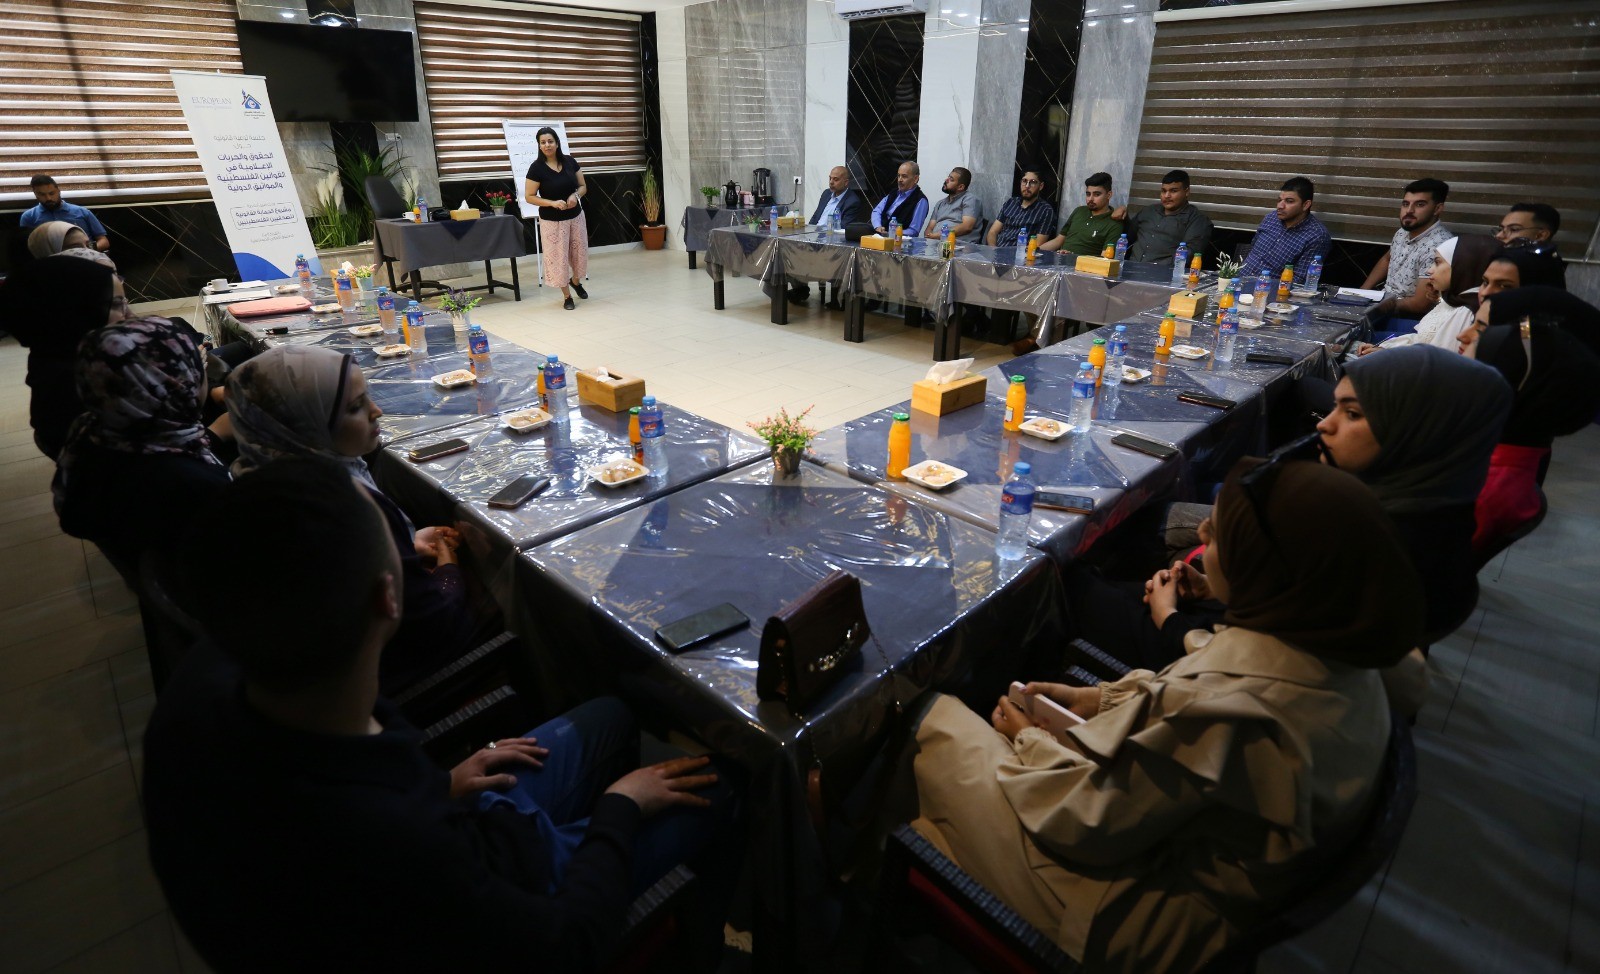 Press House holds an awareness workshop on "Sensitive Media Coverage of Gender Issues"